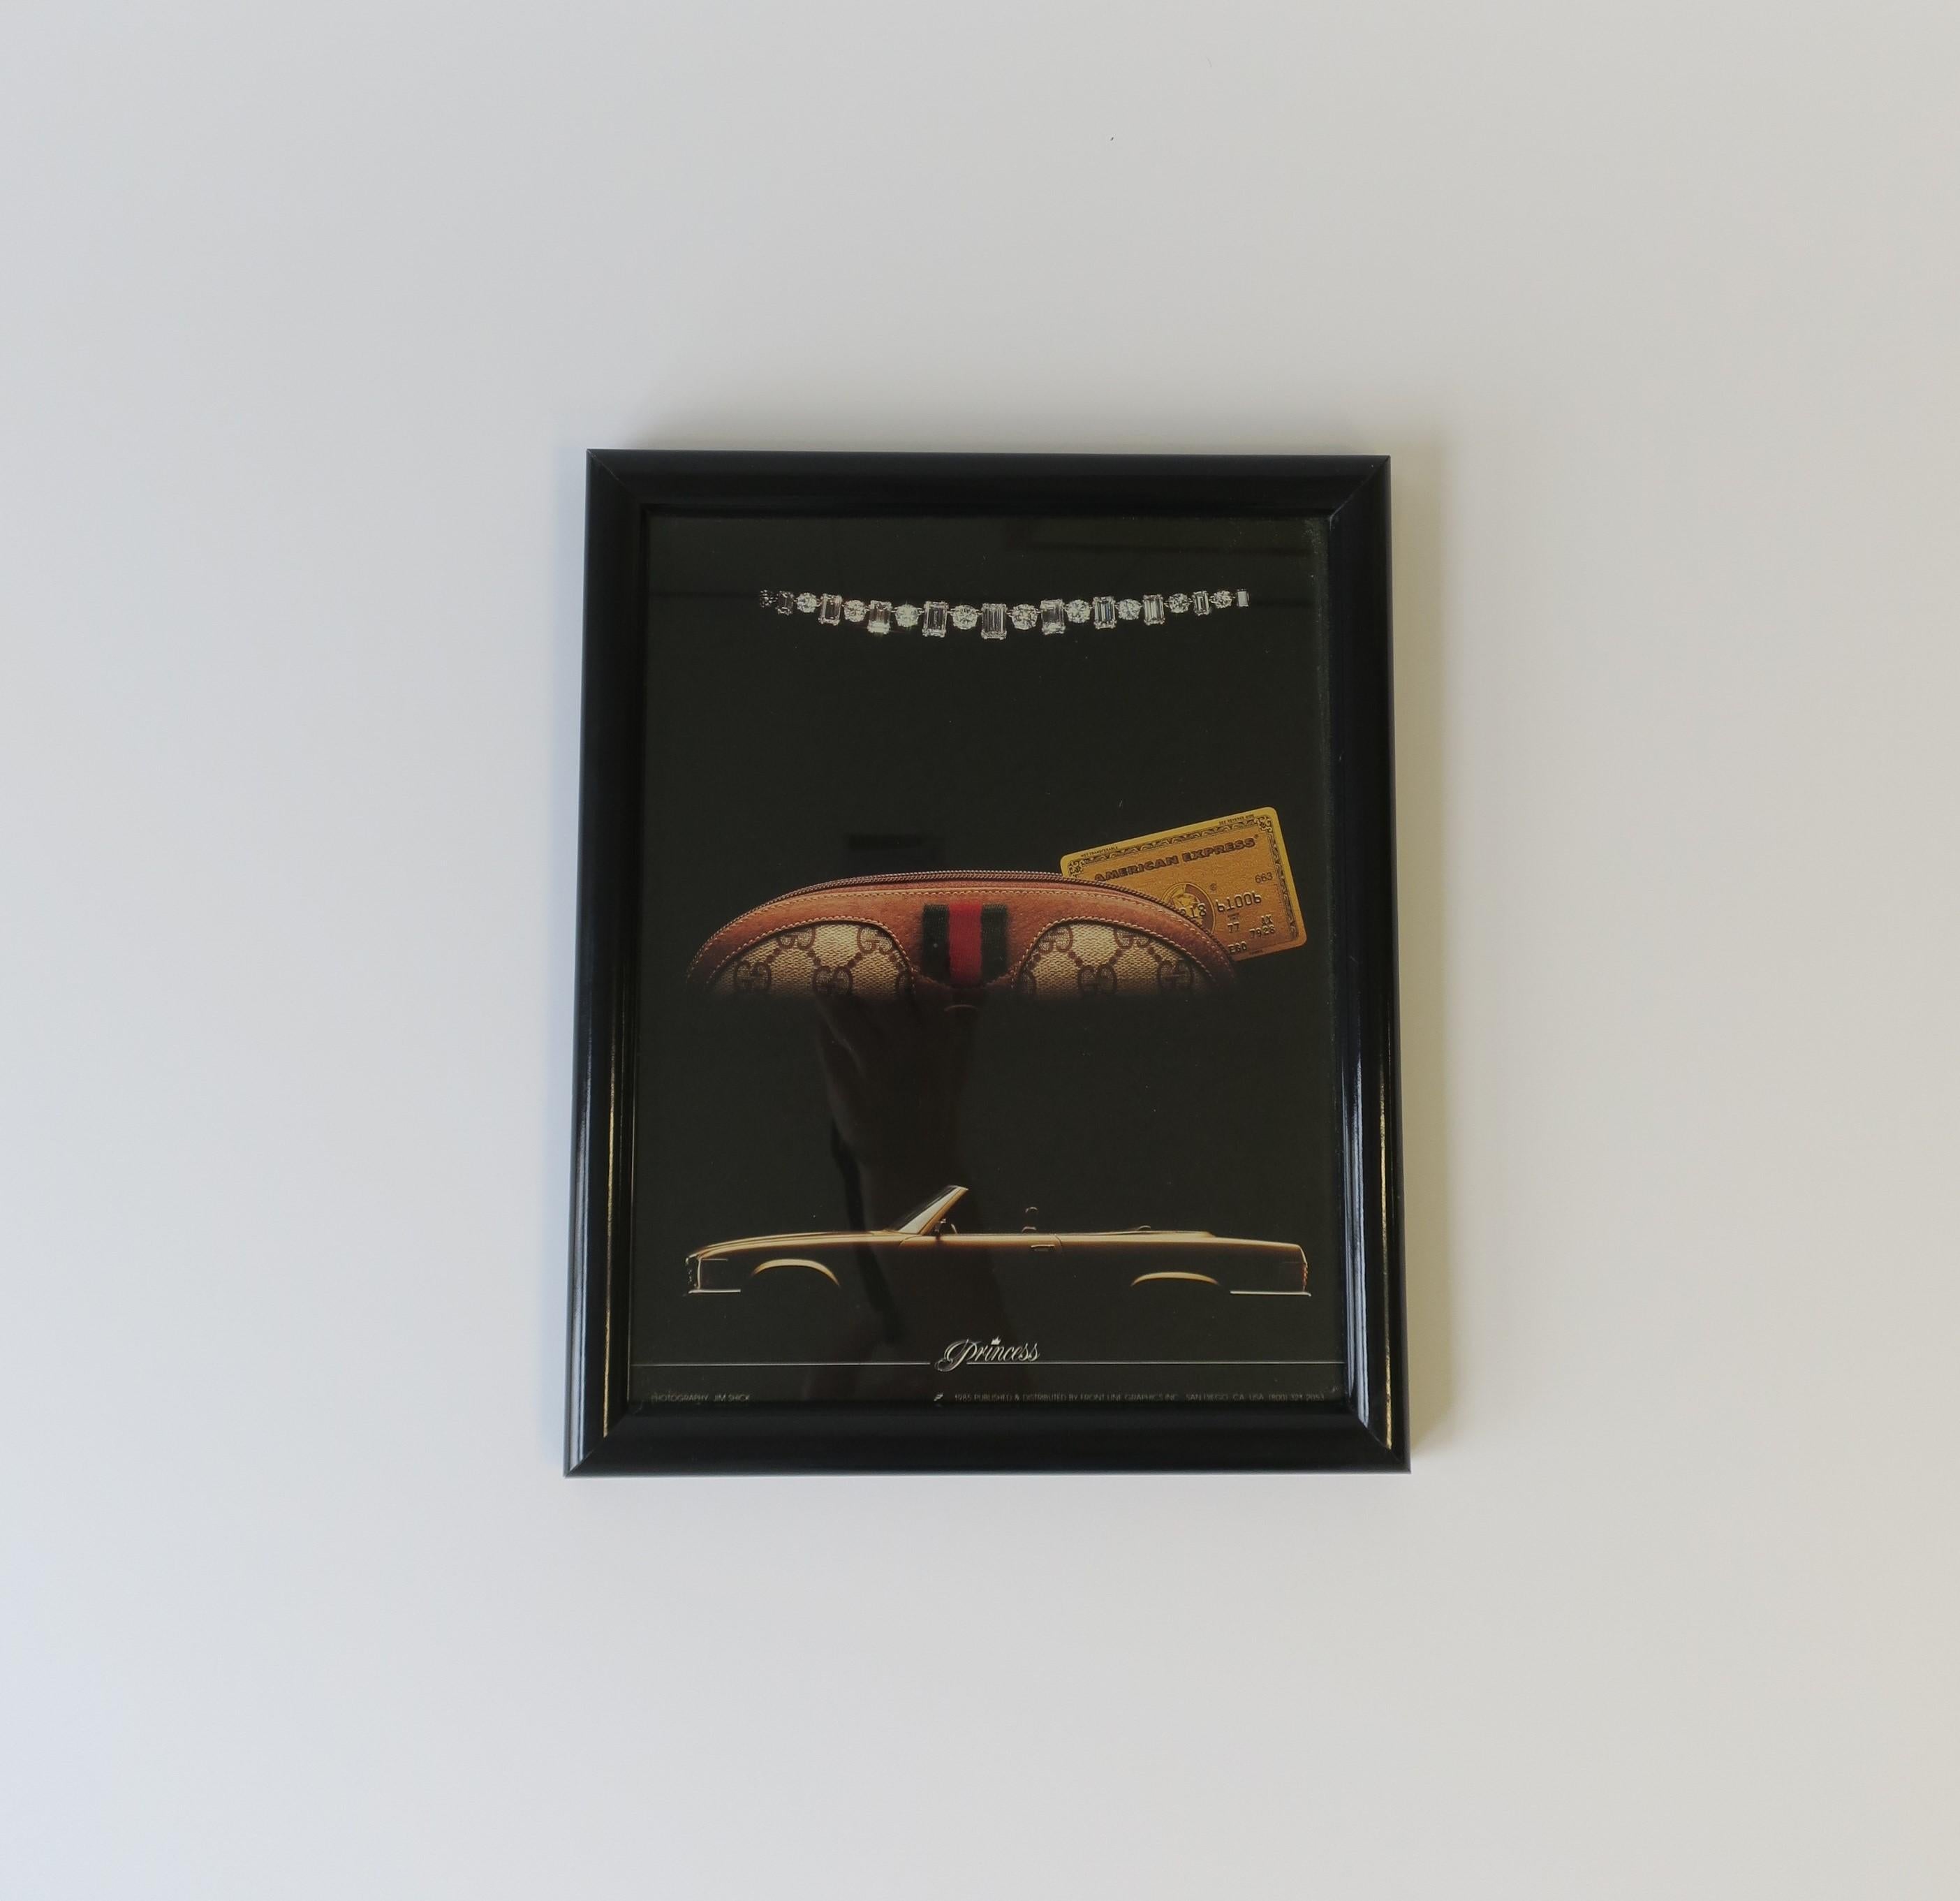 1980s indulgence captured in this custom art work image by photographer Jim Shick. Surrounded by a black lacquer frame, the photographer's definition of 1980s indulgence includes a beautiful diamond necklace, a Gucci handbag, an American Express